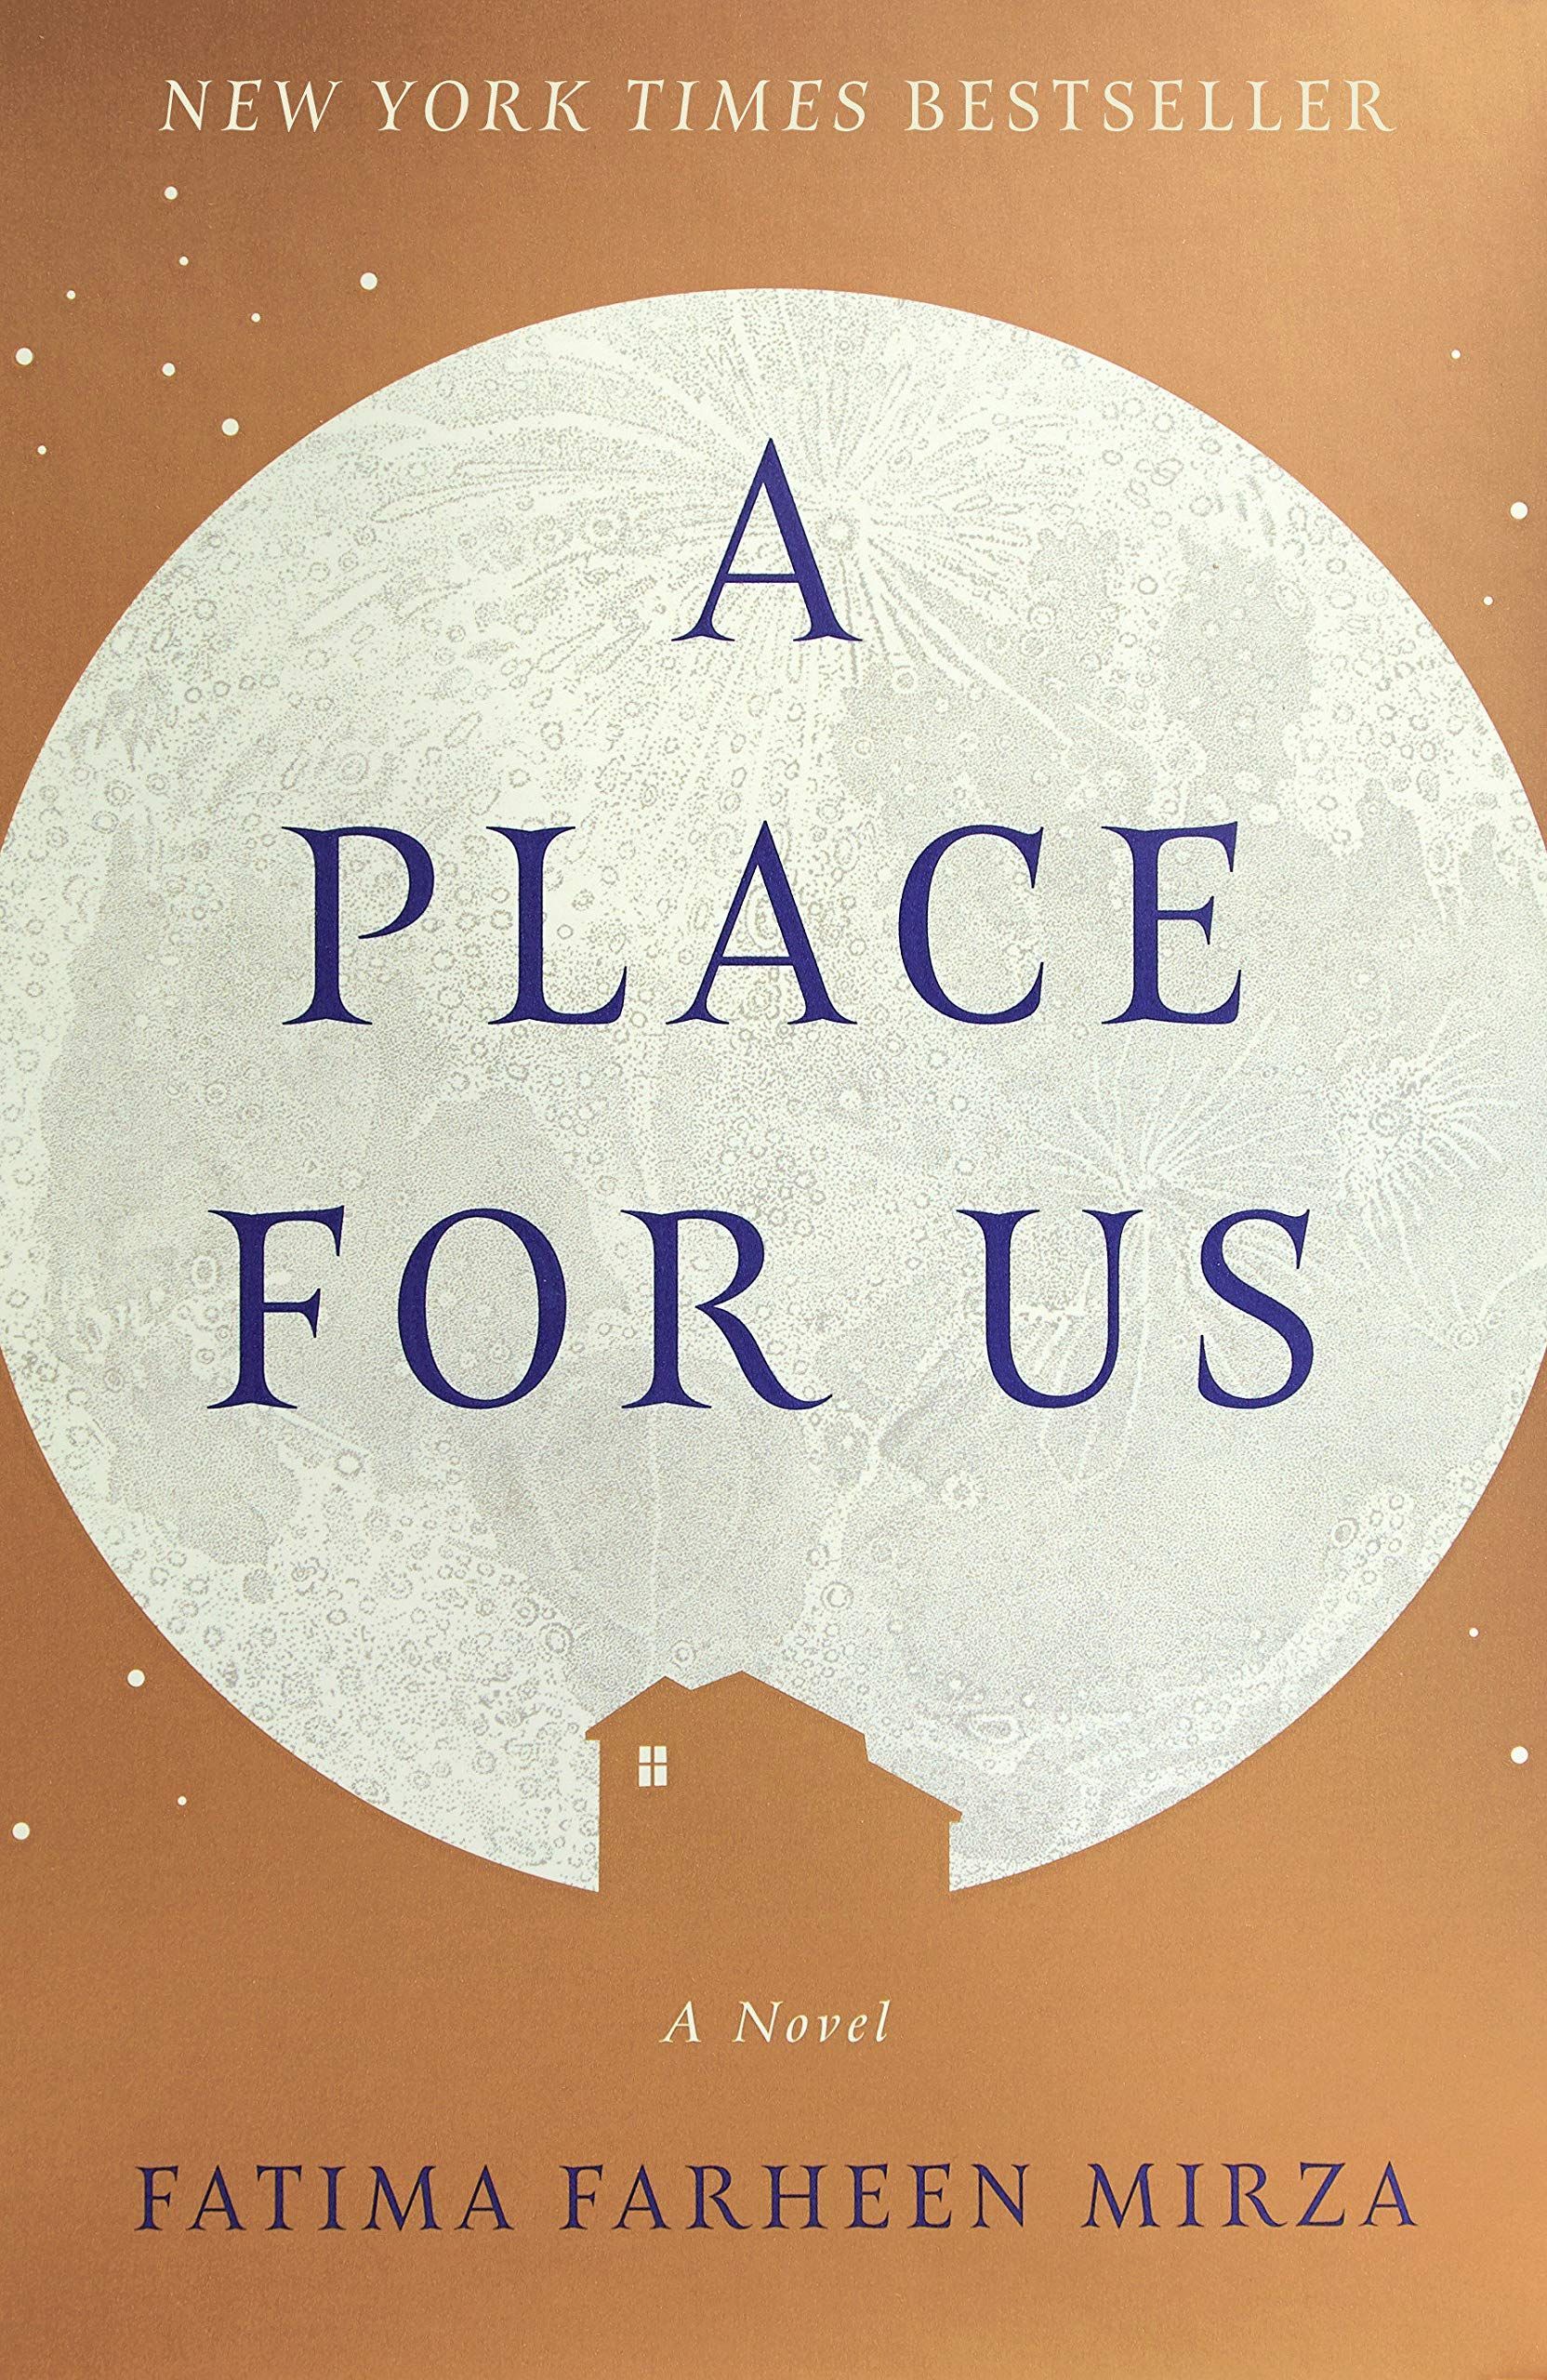 The Burden of Otherness: On Fatima Farheen Mirza’s “A Place for Us”